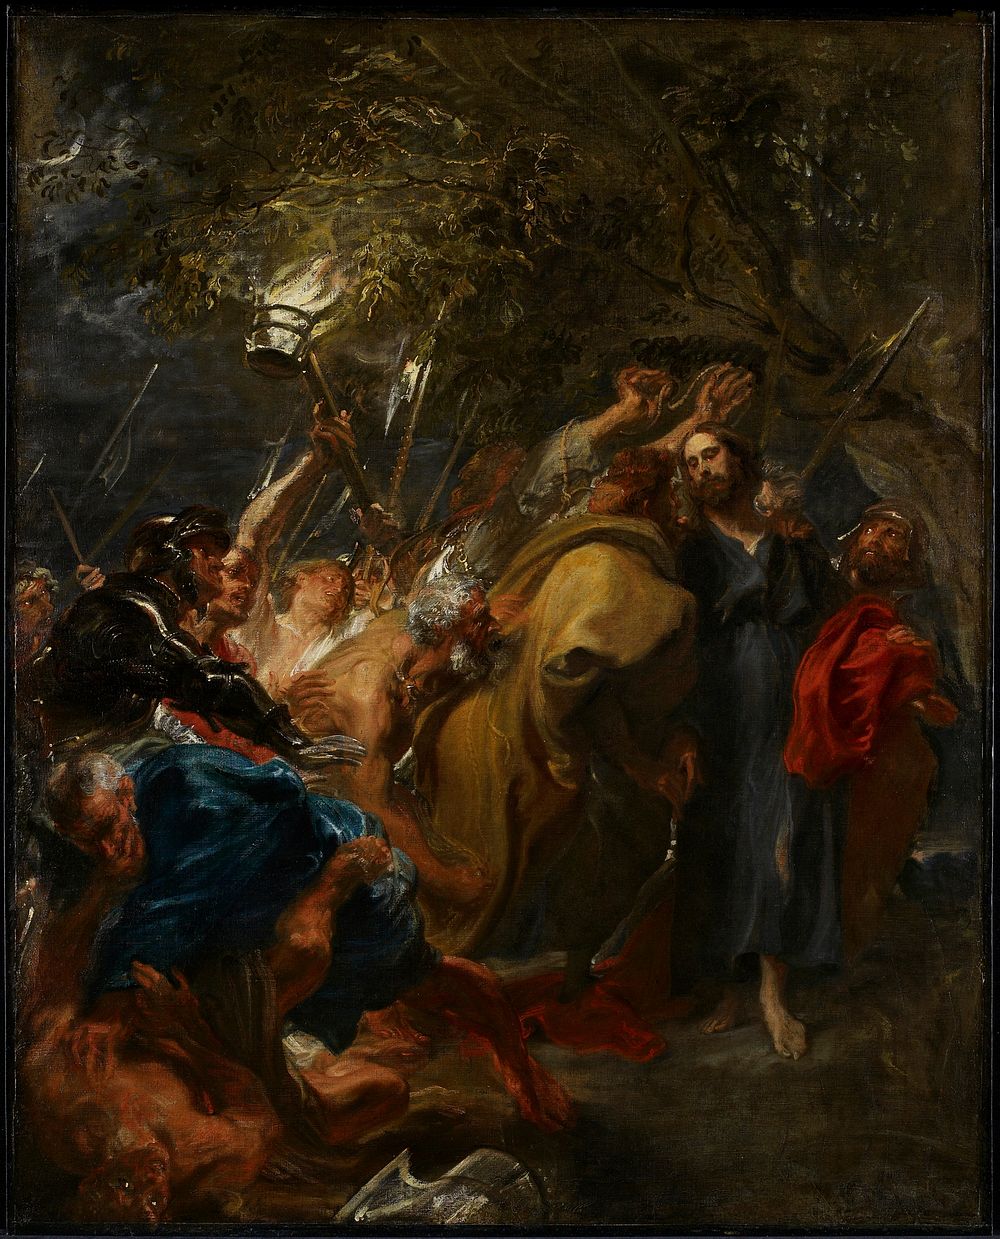 Kiss of Judas: accompanied by soldiers with torches and lanterns, he kisses Christ. The scene is described in the Bible:…